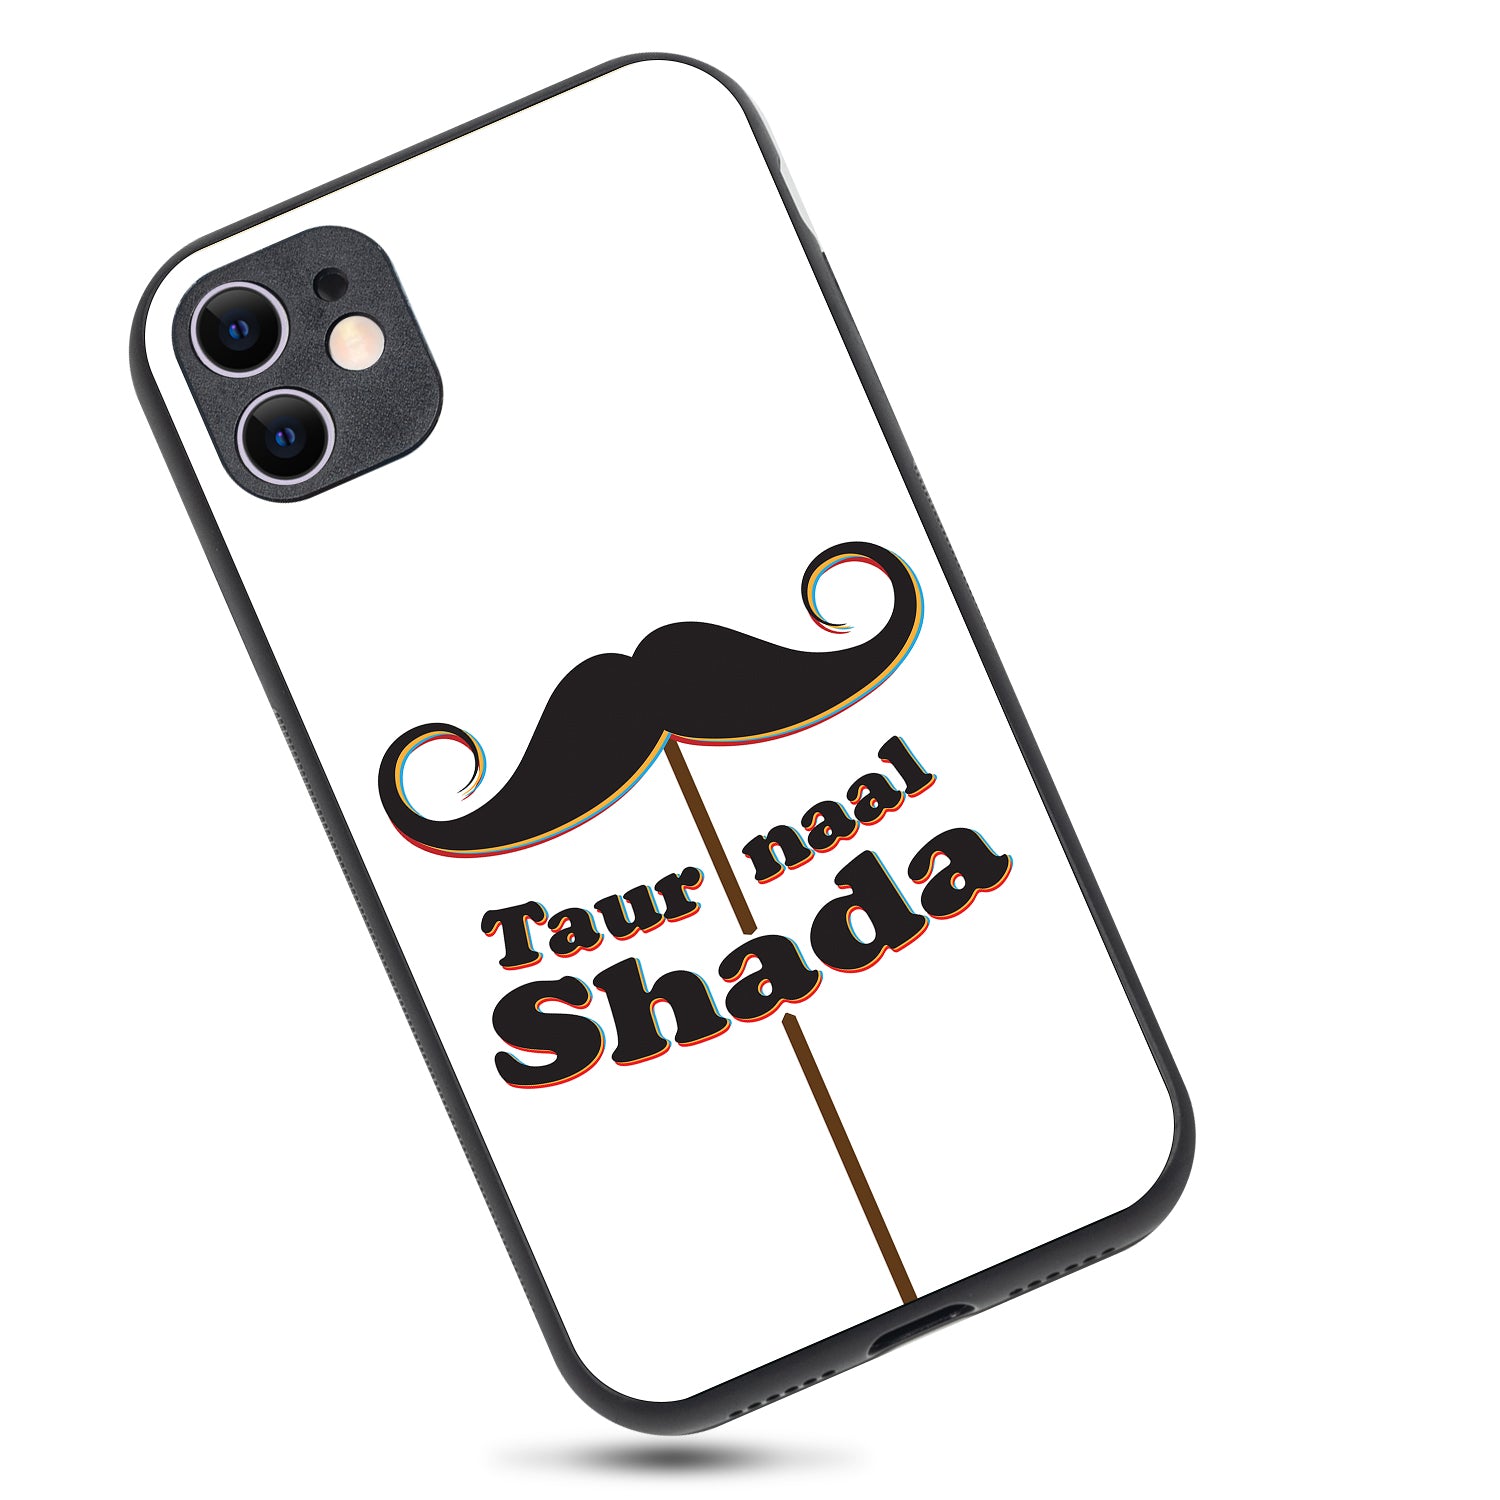 Taur Naal Shada Motivational Quotes iPhone 11 Case